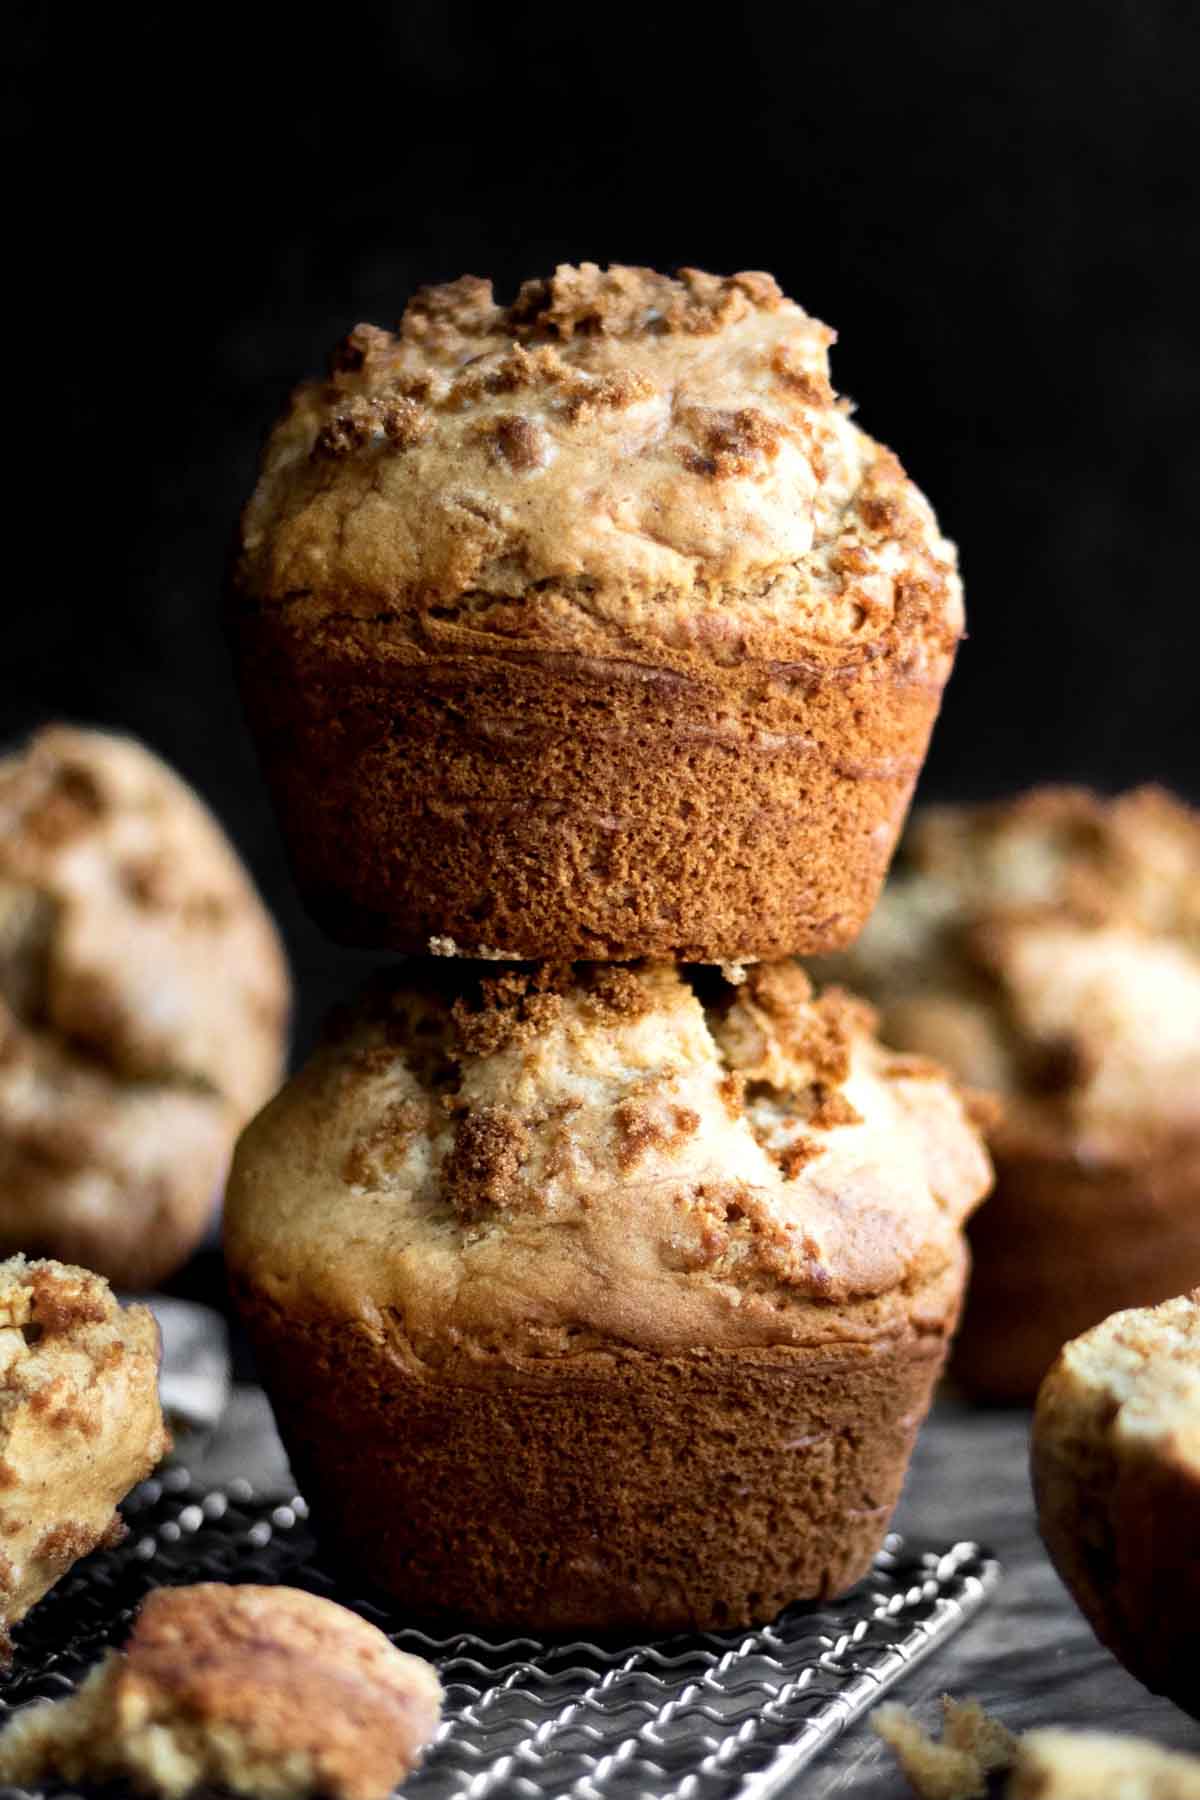 A stack of two Jumbo Gingerbread Muffins with brown sugar crusted tops.